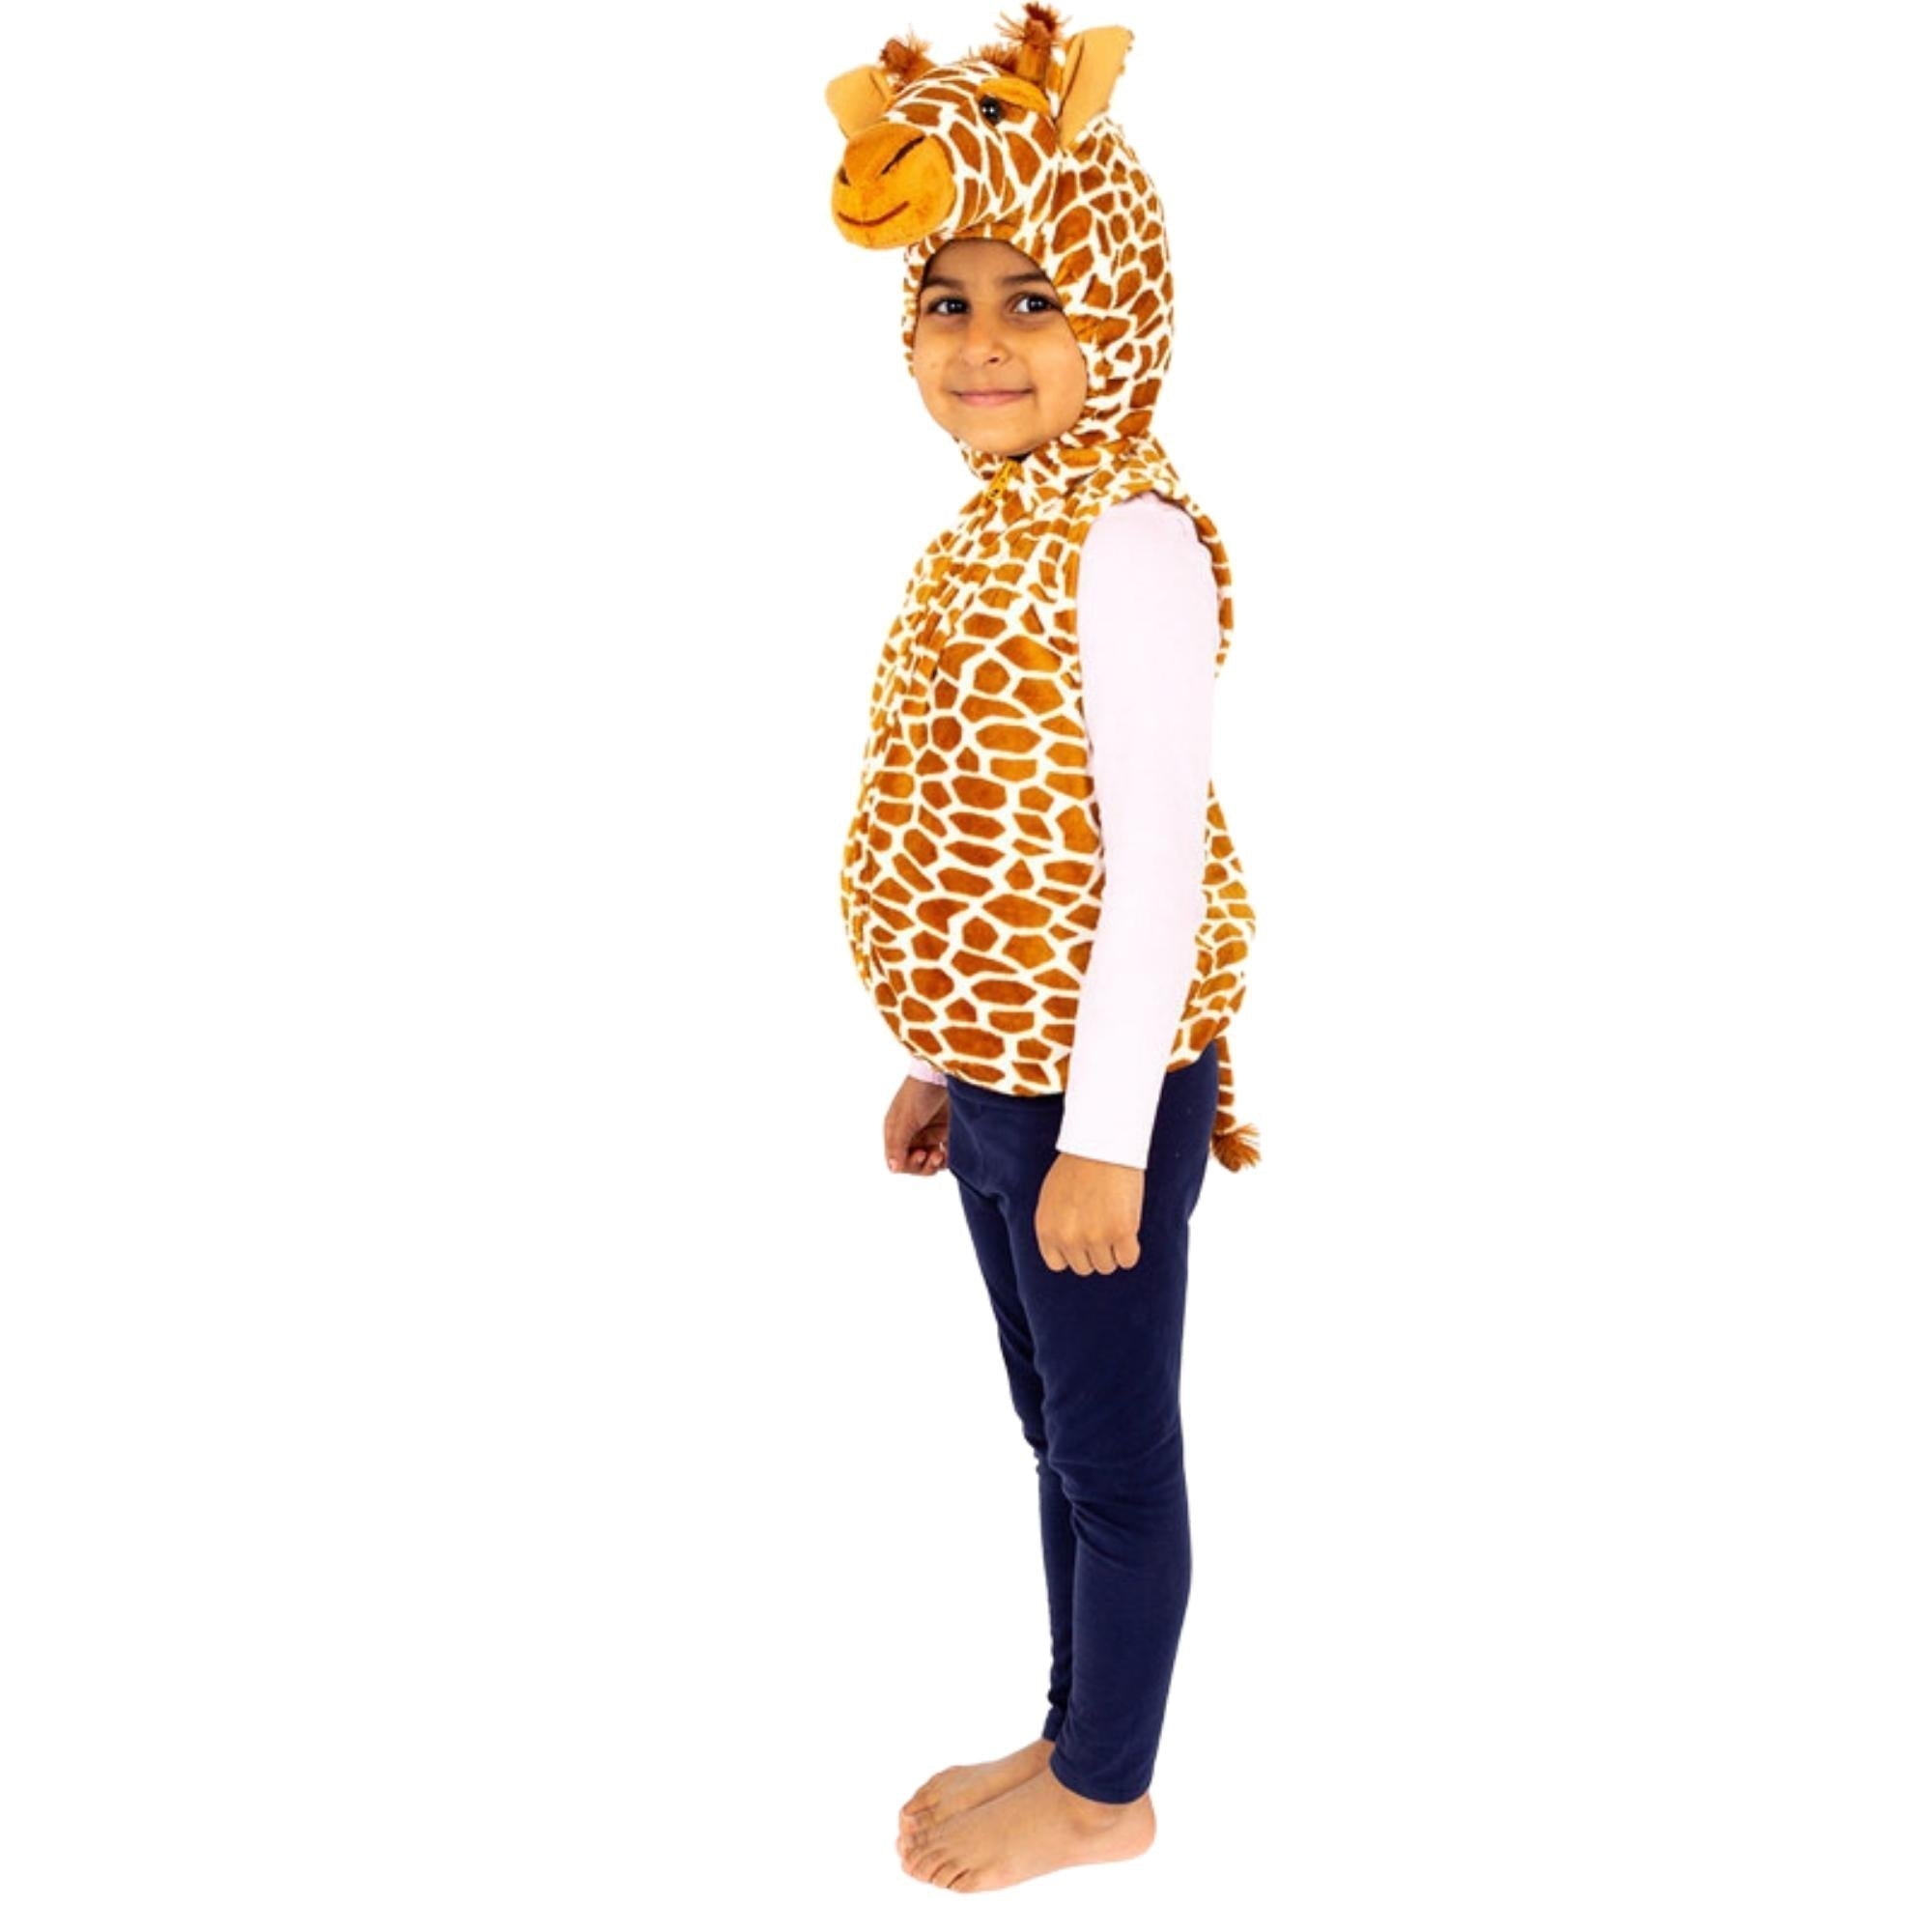 Giraffe Zip Top fancy dress, Children will love this Giraffe costume with easy-wear Zip Top design and will have lots of fun enjoying the world of animal role play. This fantastic giraffe fancy zip top from Pretend to Bee is brilliantly detailed and super-soft. Made from a spot printed velour fabric the top is closed by a front zip and it has a velour hood with giraffe head. The giraffe face features a long nose, eyes,, giraffe ossicones (horns) and pointed ears. At the back of the costume there is a tail. 